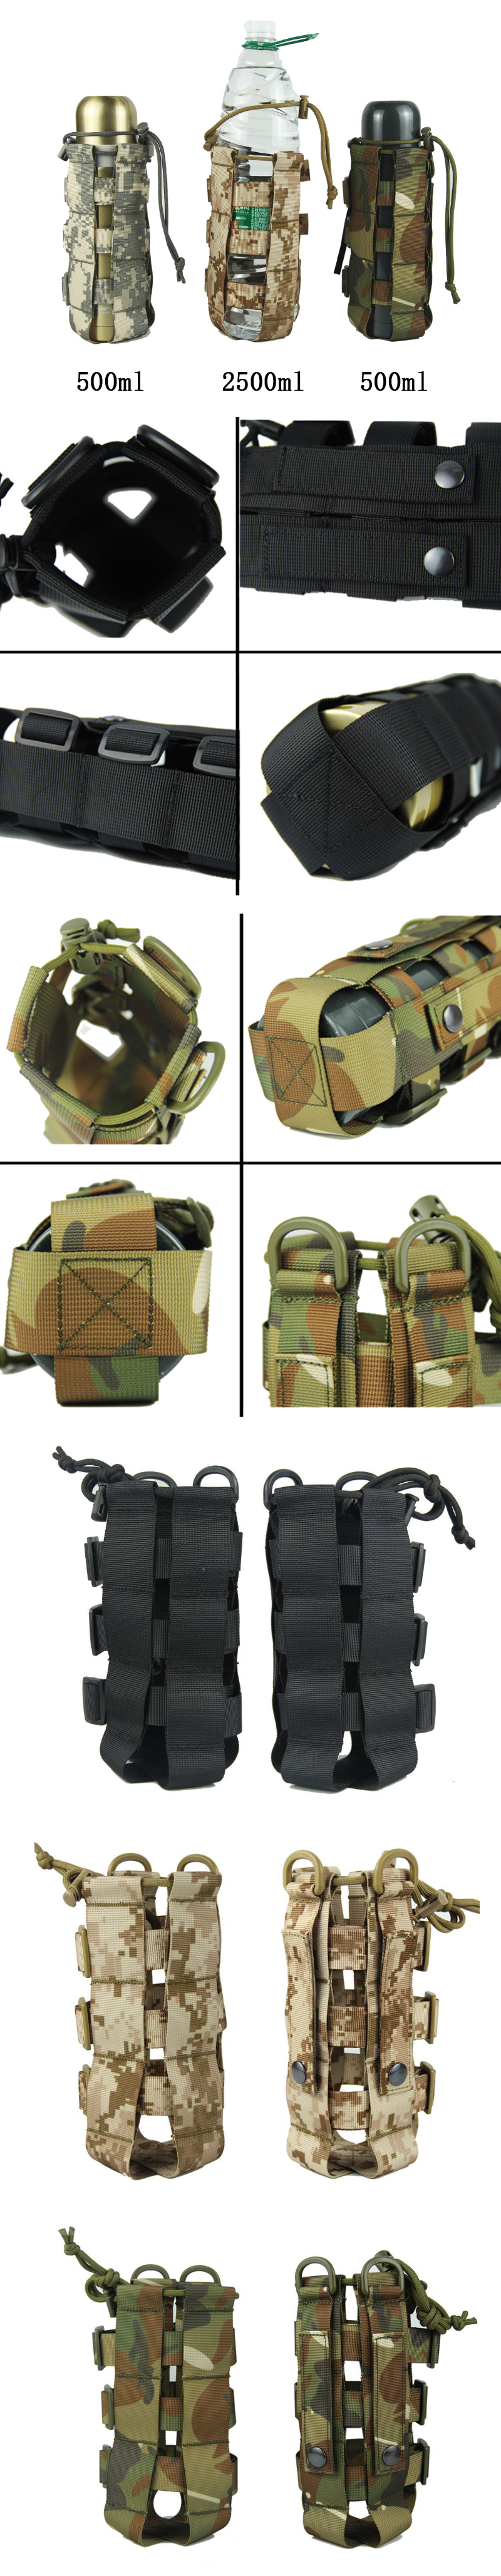 KALOAD-AC019-5002500ml-Water-Bottle-Bag-Camping-Hiking-Tactical-Kettle-Pouch-Portable-Cup-Storage-Ba-1429061-1